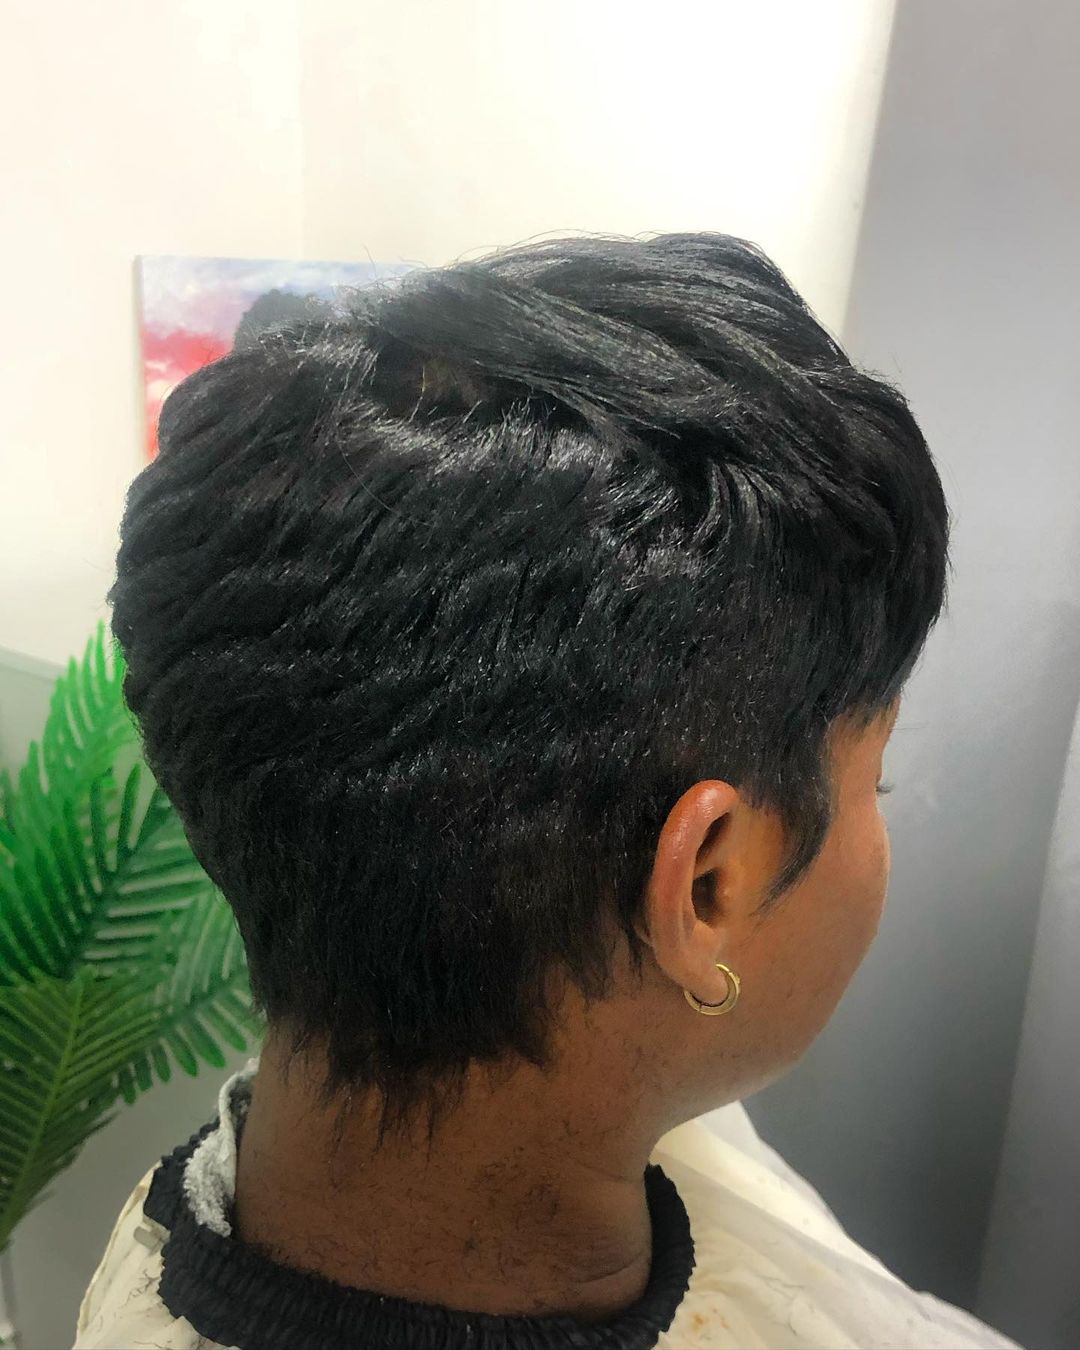 40+ Short Hairstyles for Black Women - March 2023